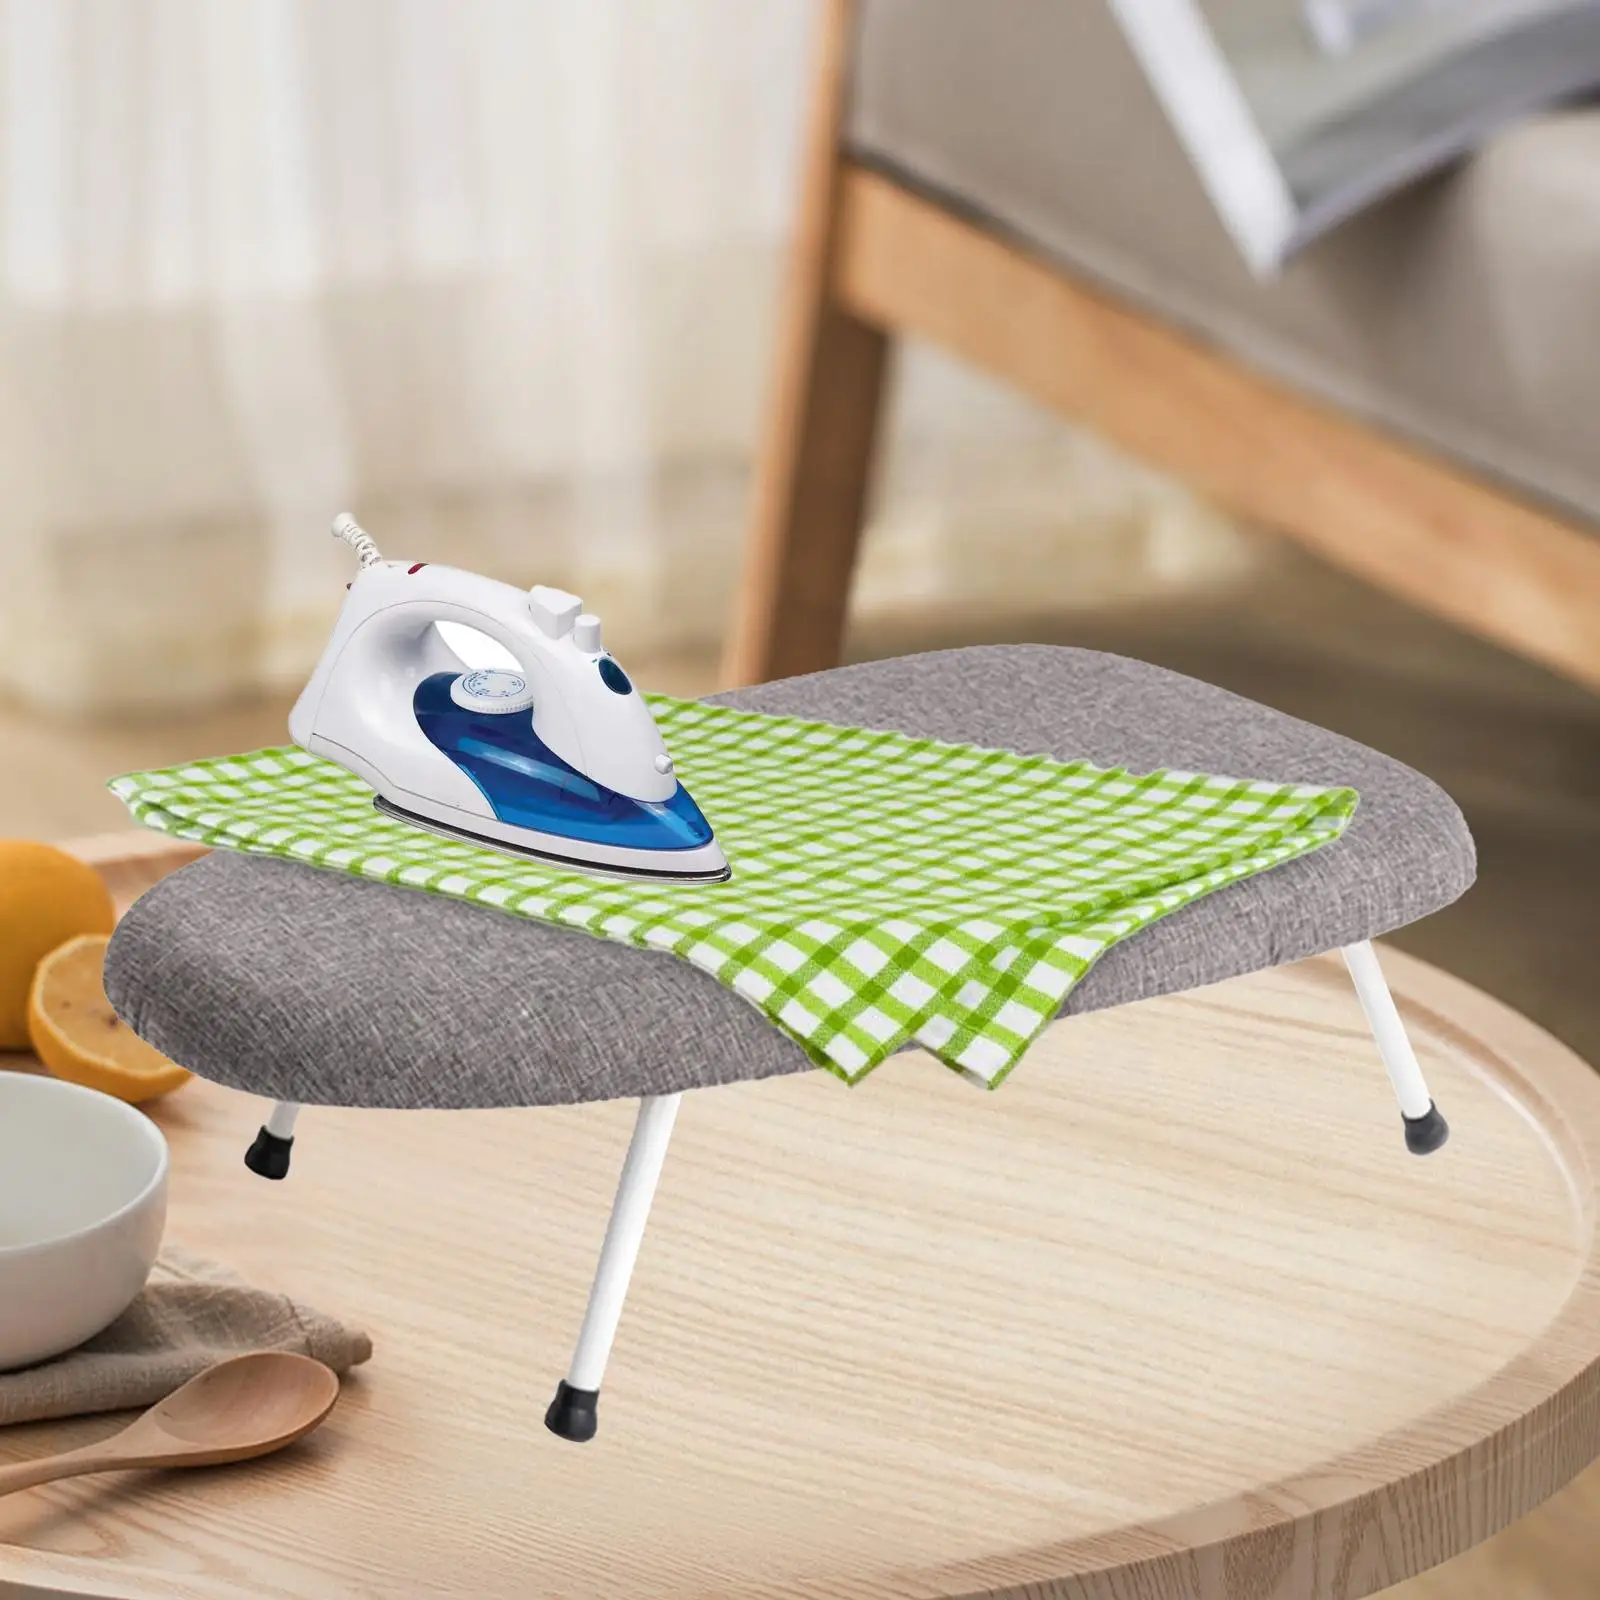 Mini Ironing Board Ironing Table Heavy Duty Ironing Clothes with Folding Legs Portable for Laundry Room Home Dorm Travel Sleeves